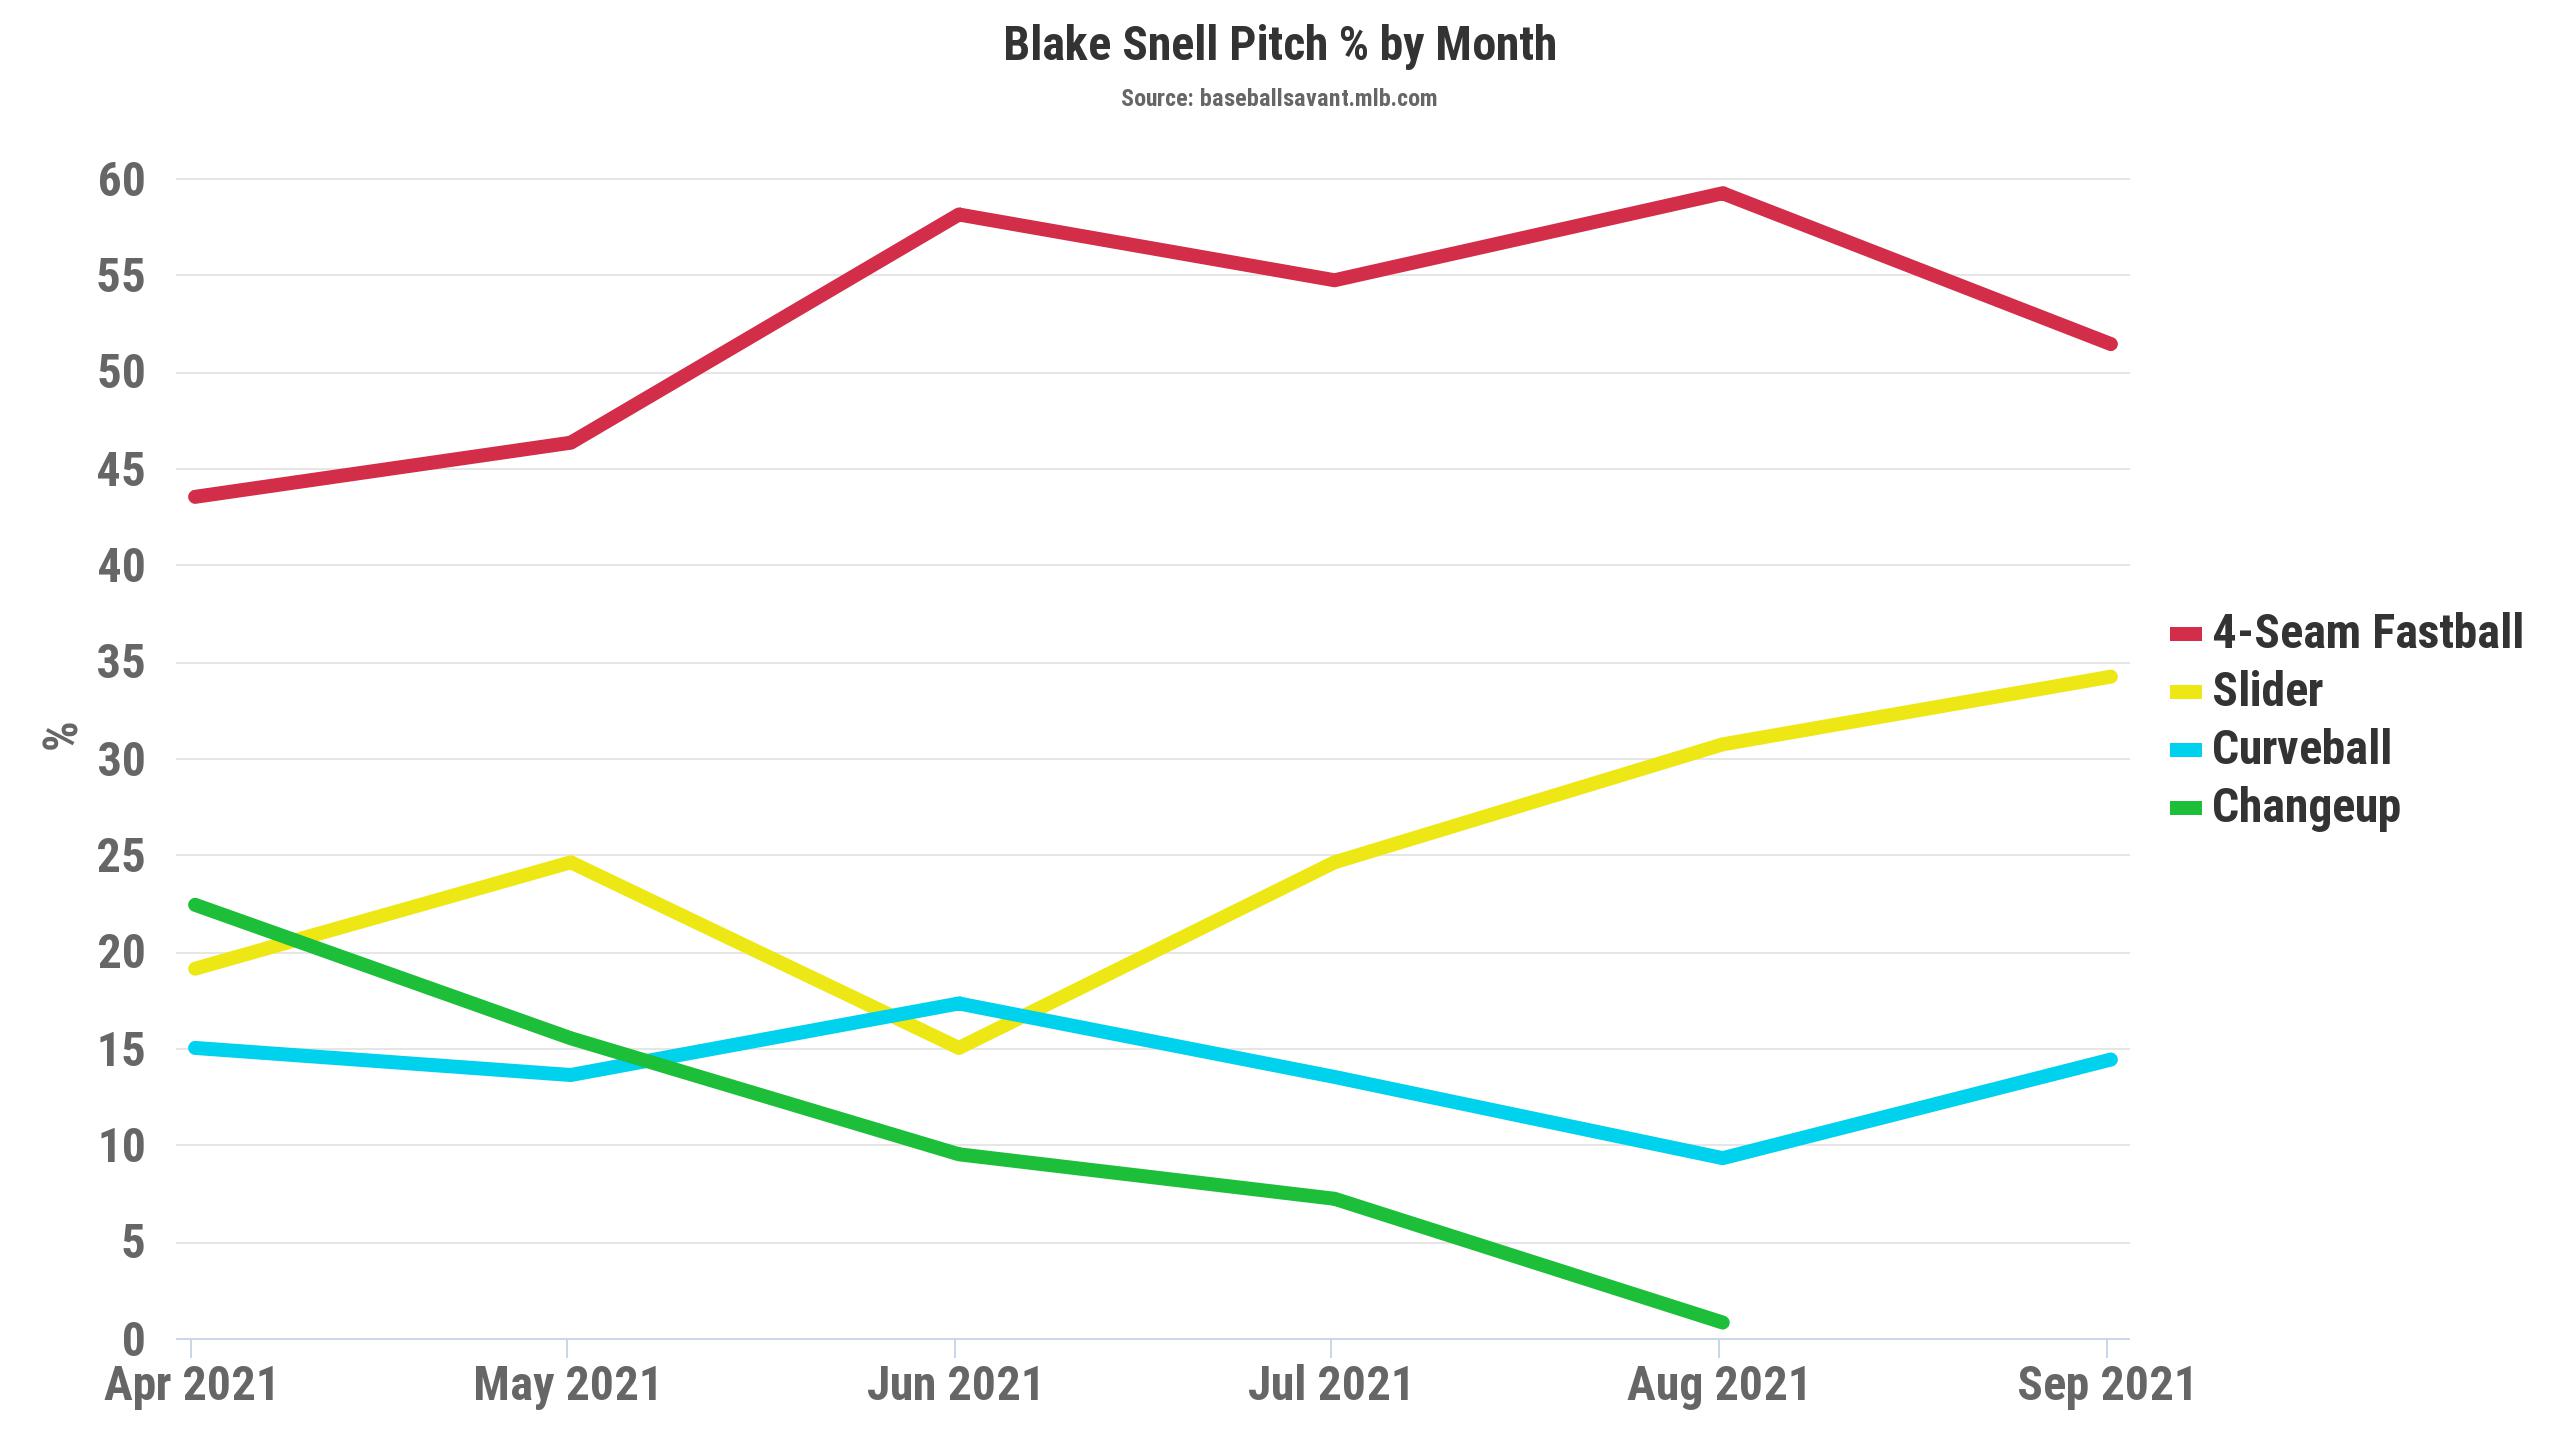 Blake Snell Pitch Mix Usage in 2021